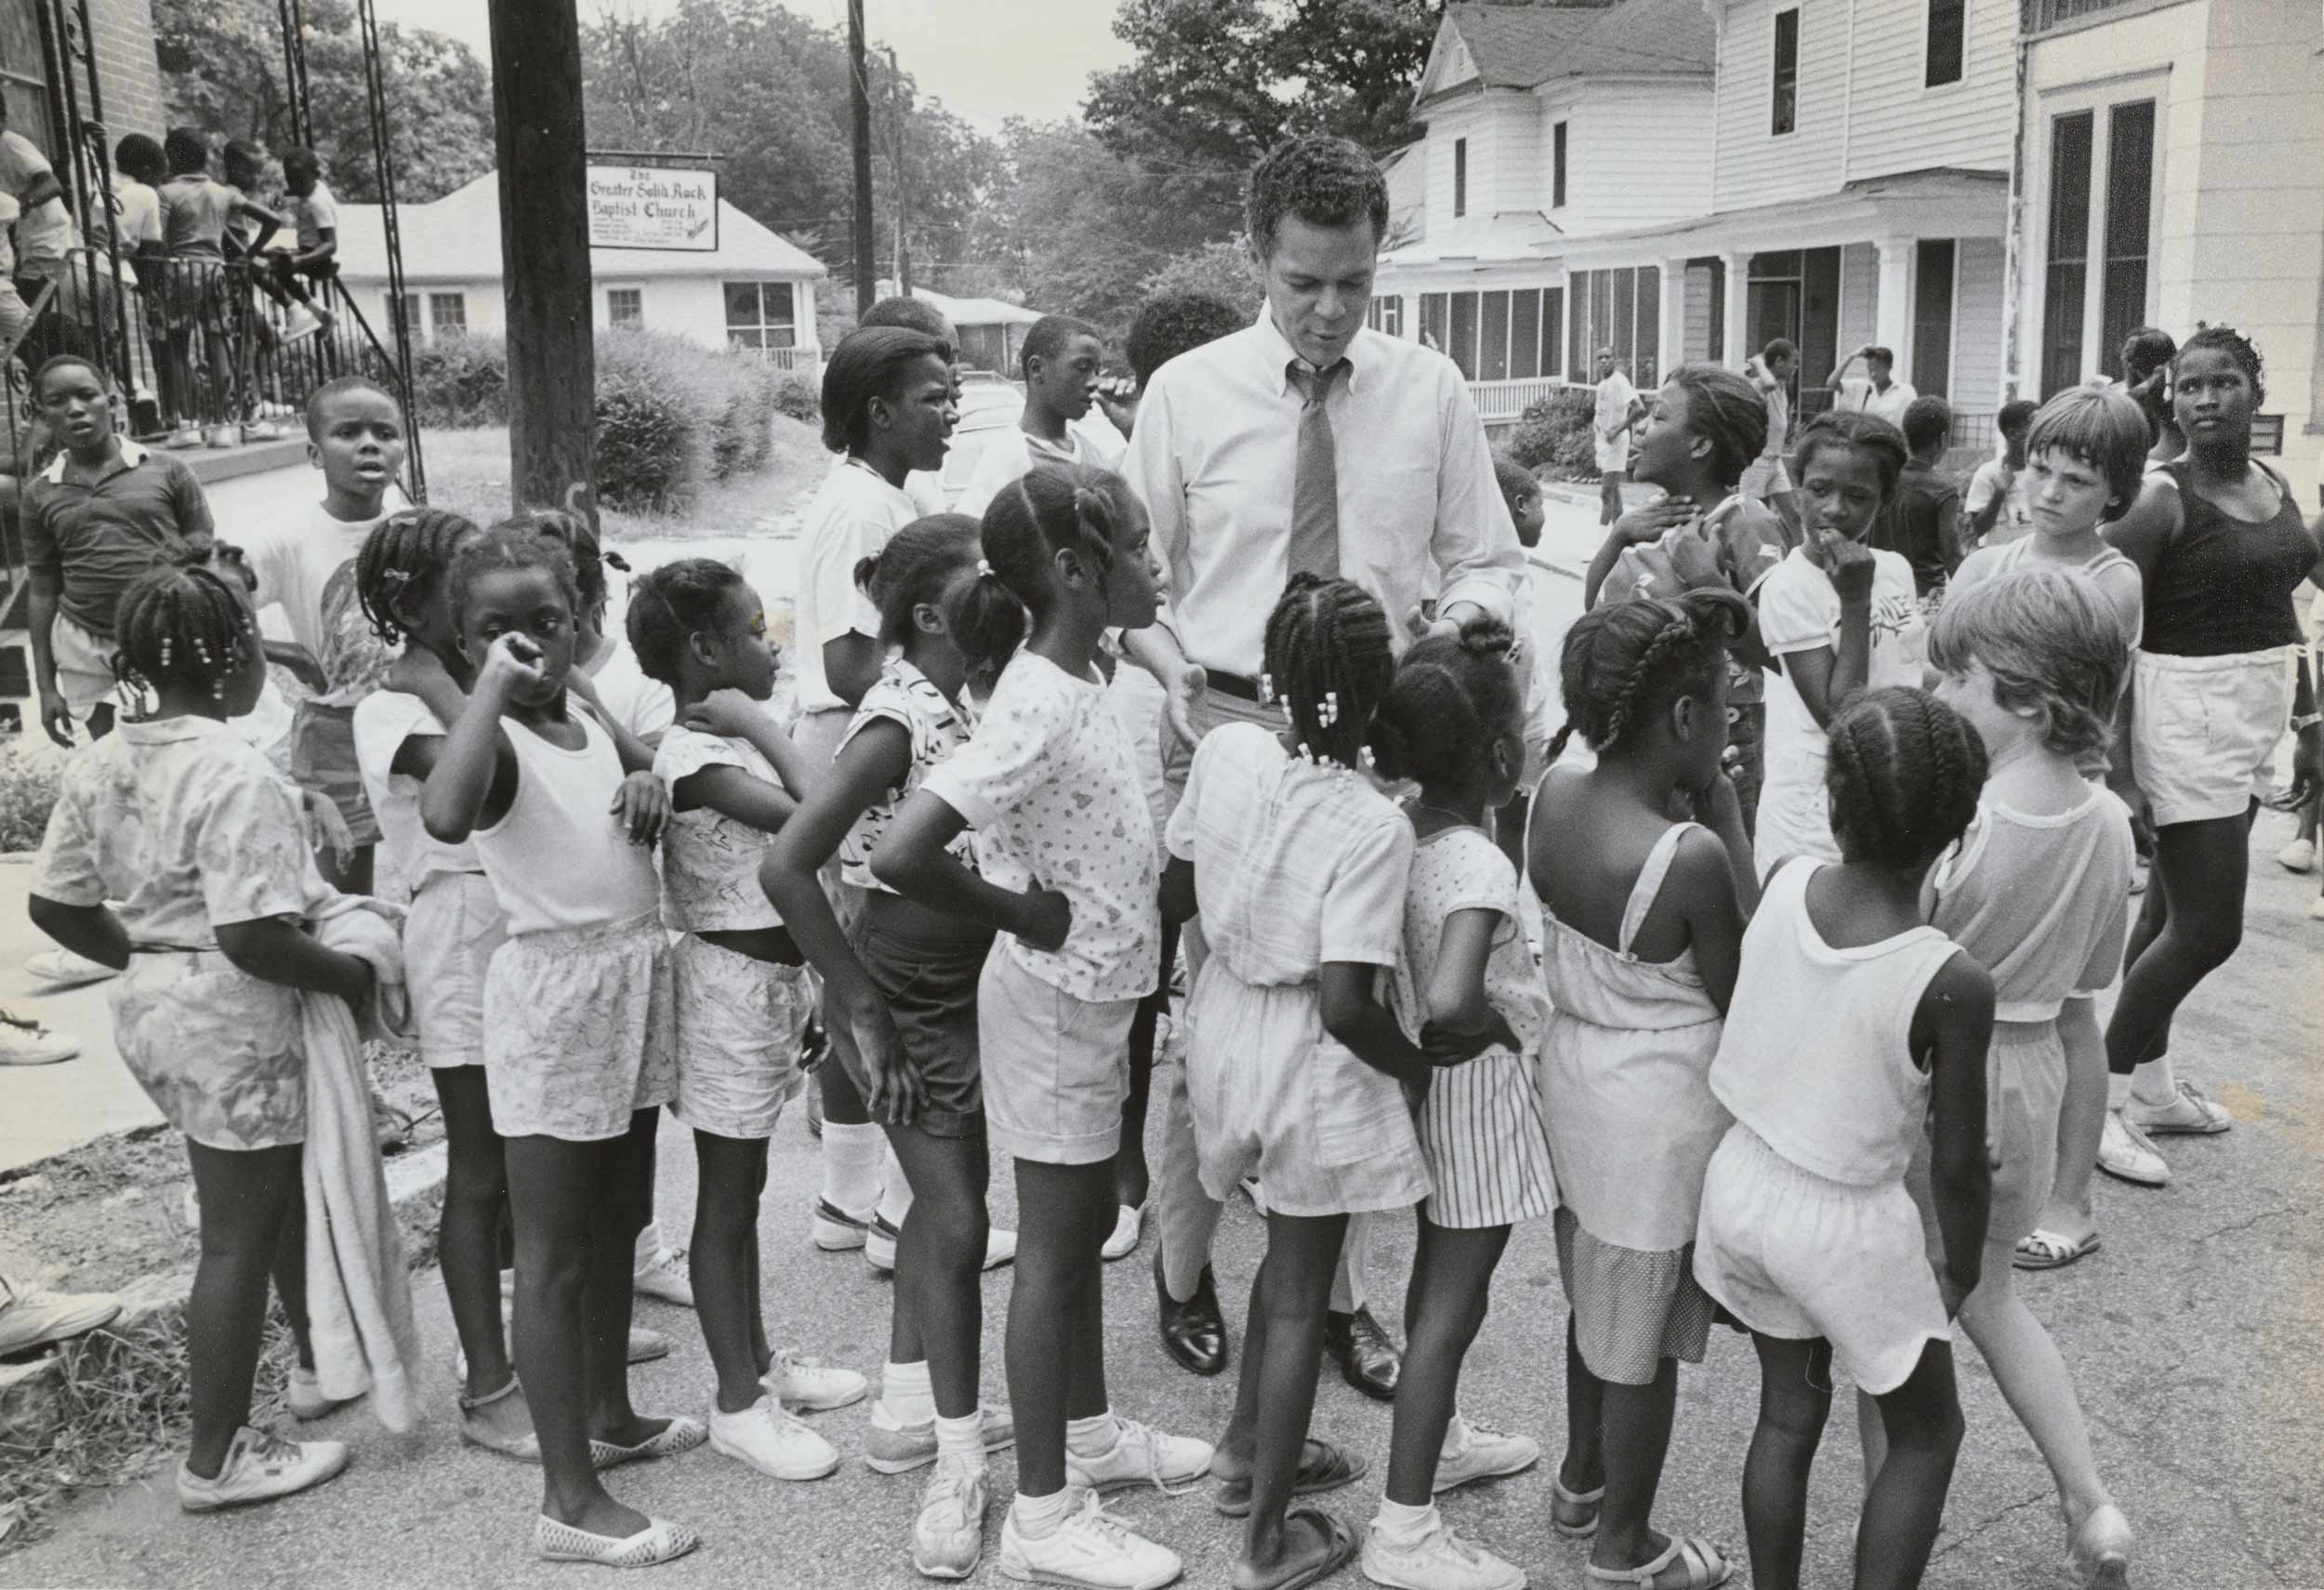 Julian Bond surrounded by a group of children in the American South.